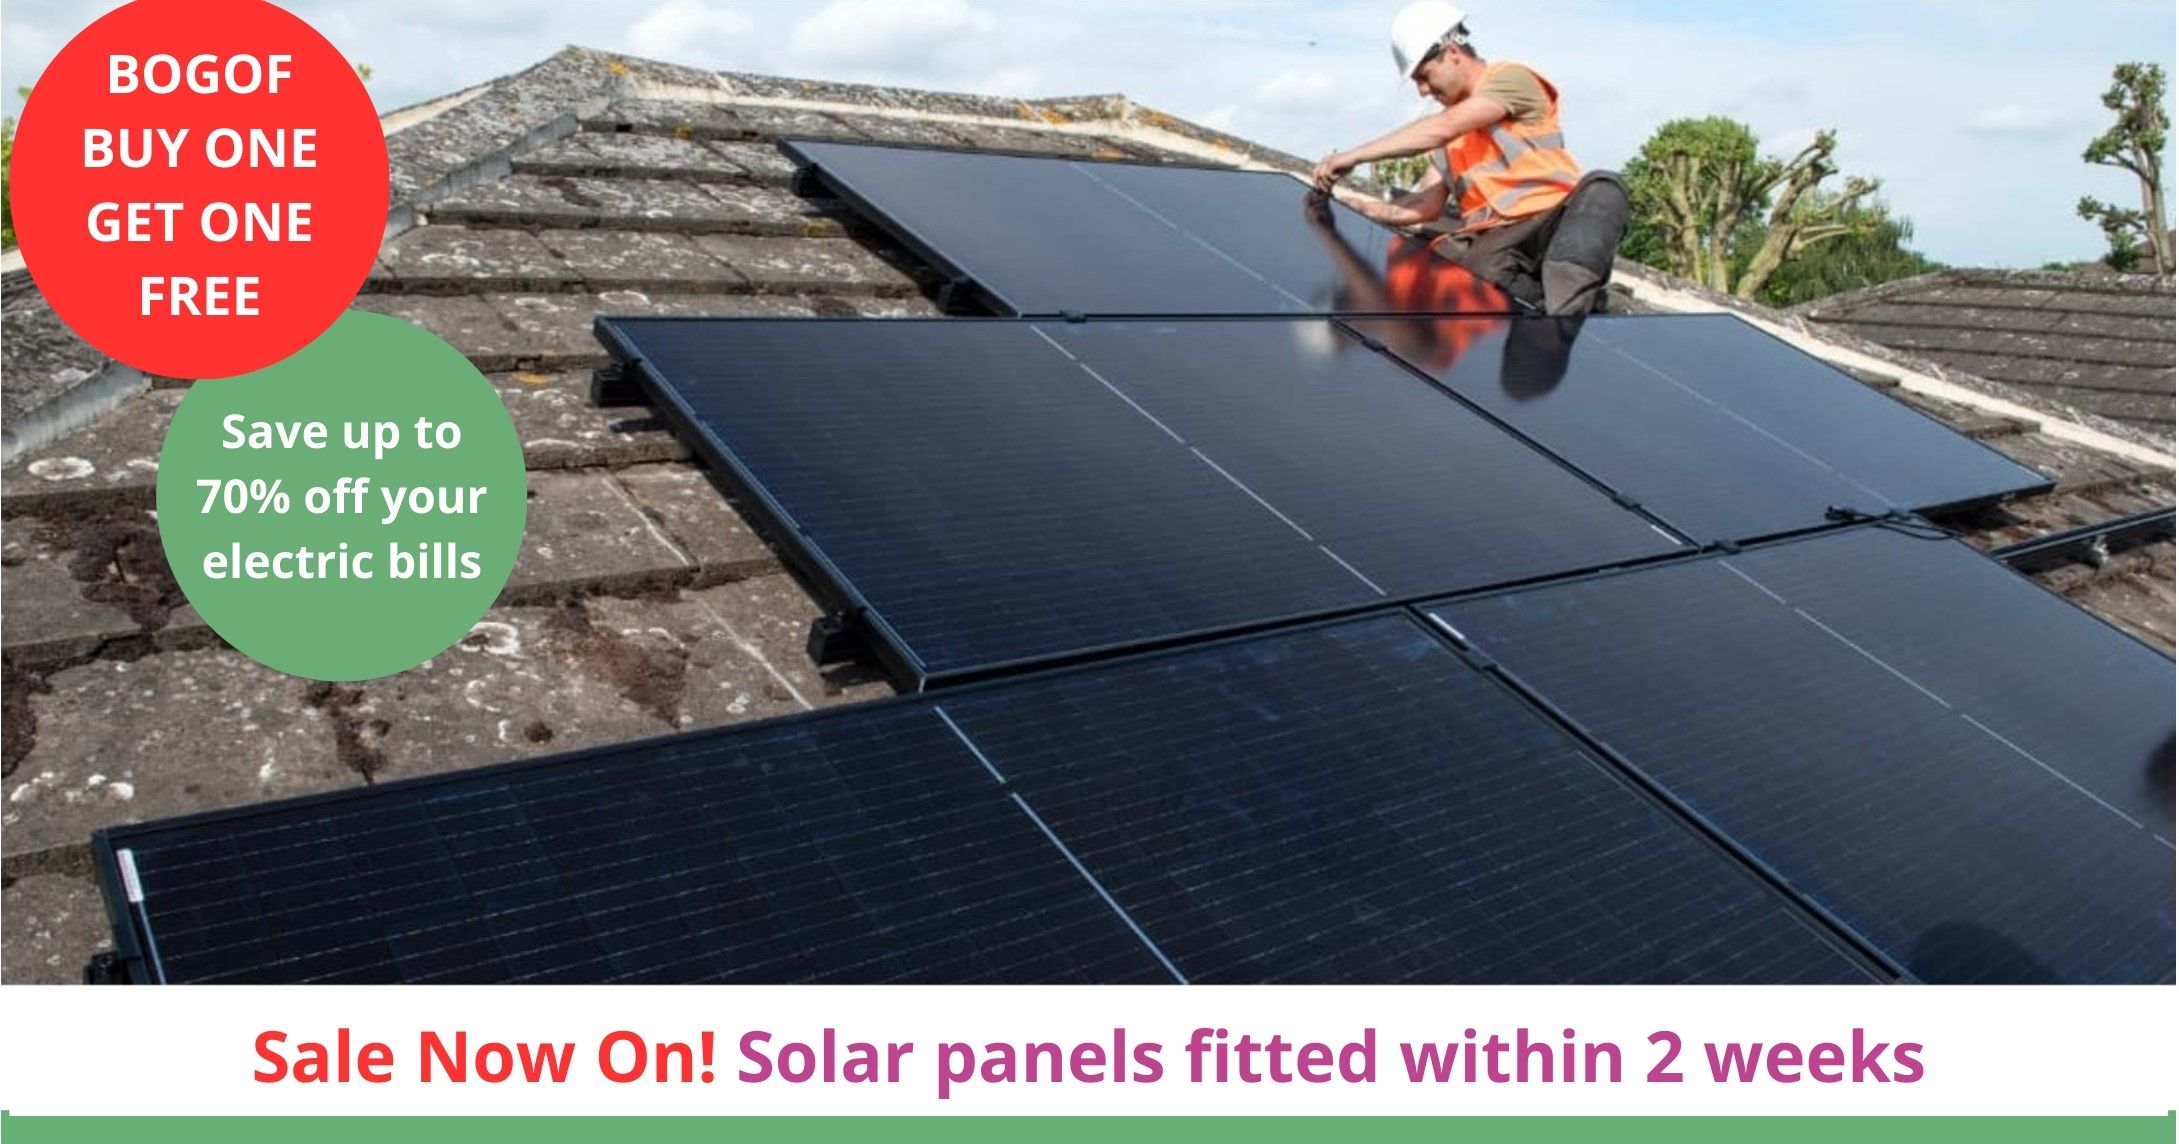 Buy on get one free on solar panels